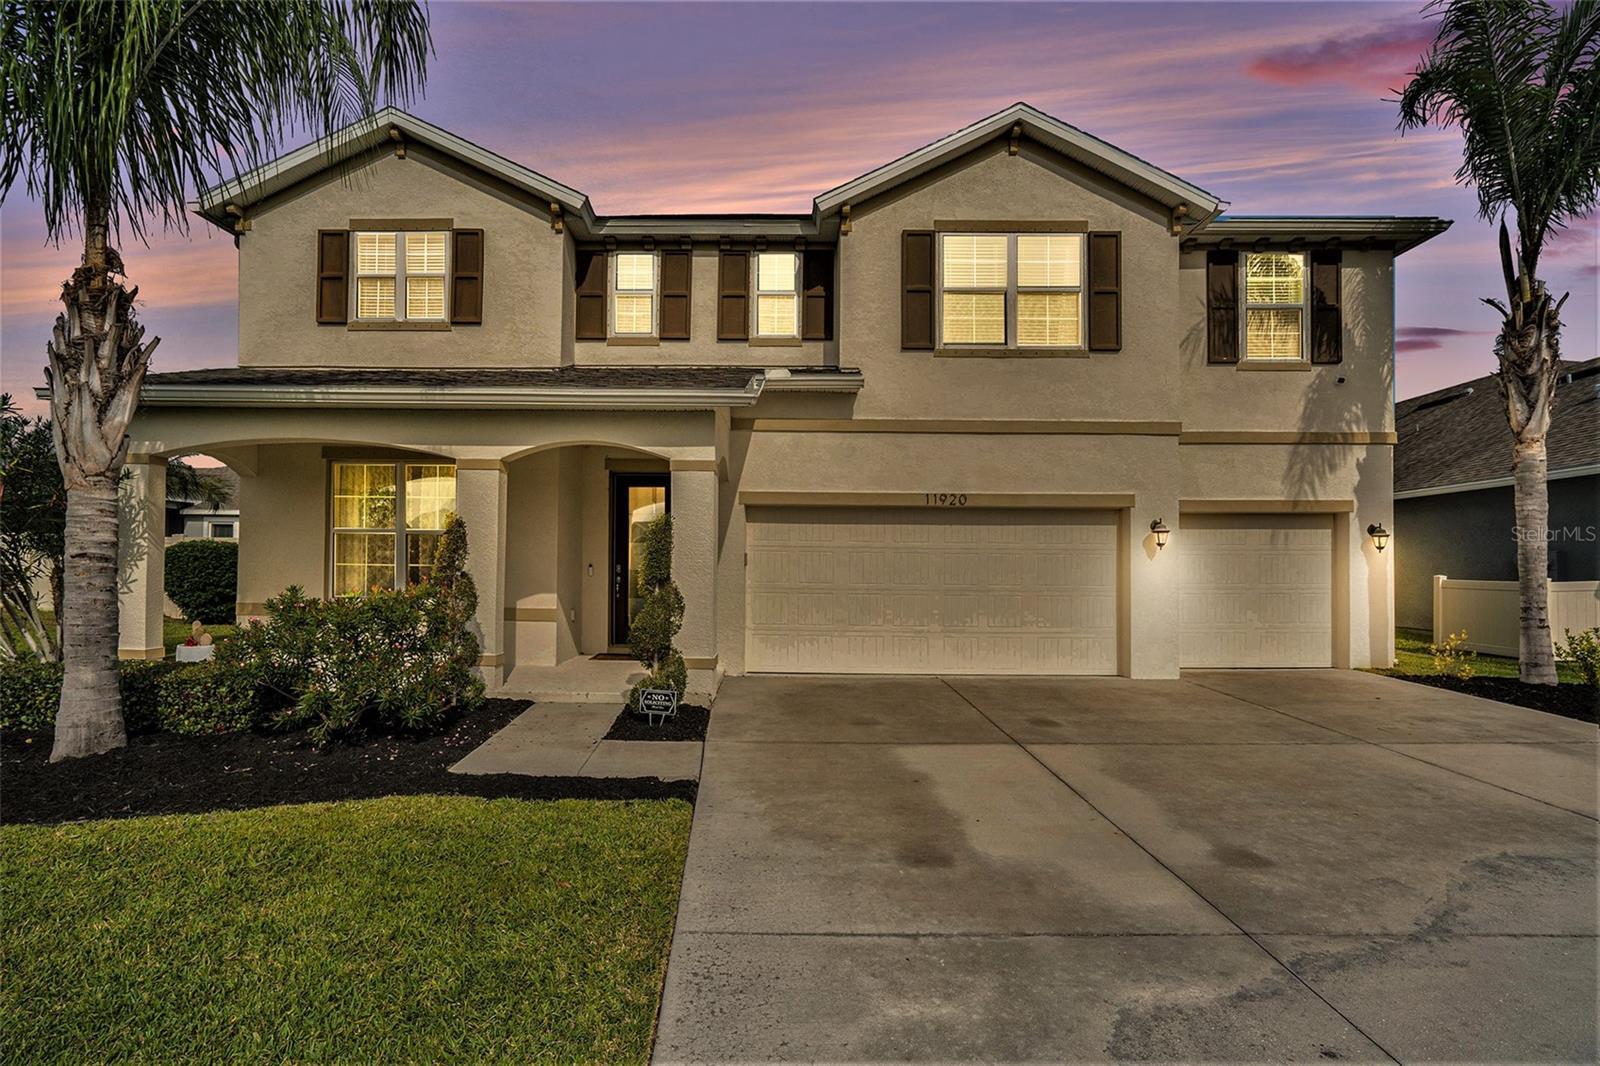 Photo one of 11920 Tetrafin Dr Riverview FL 33579 | MLS T3494982